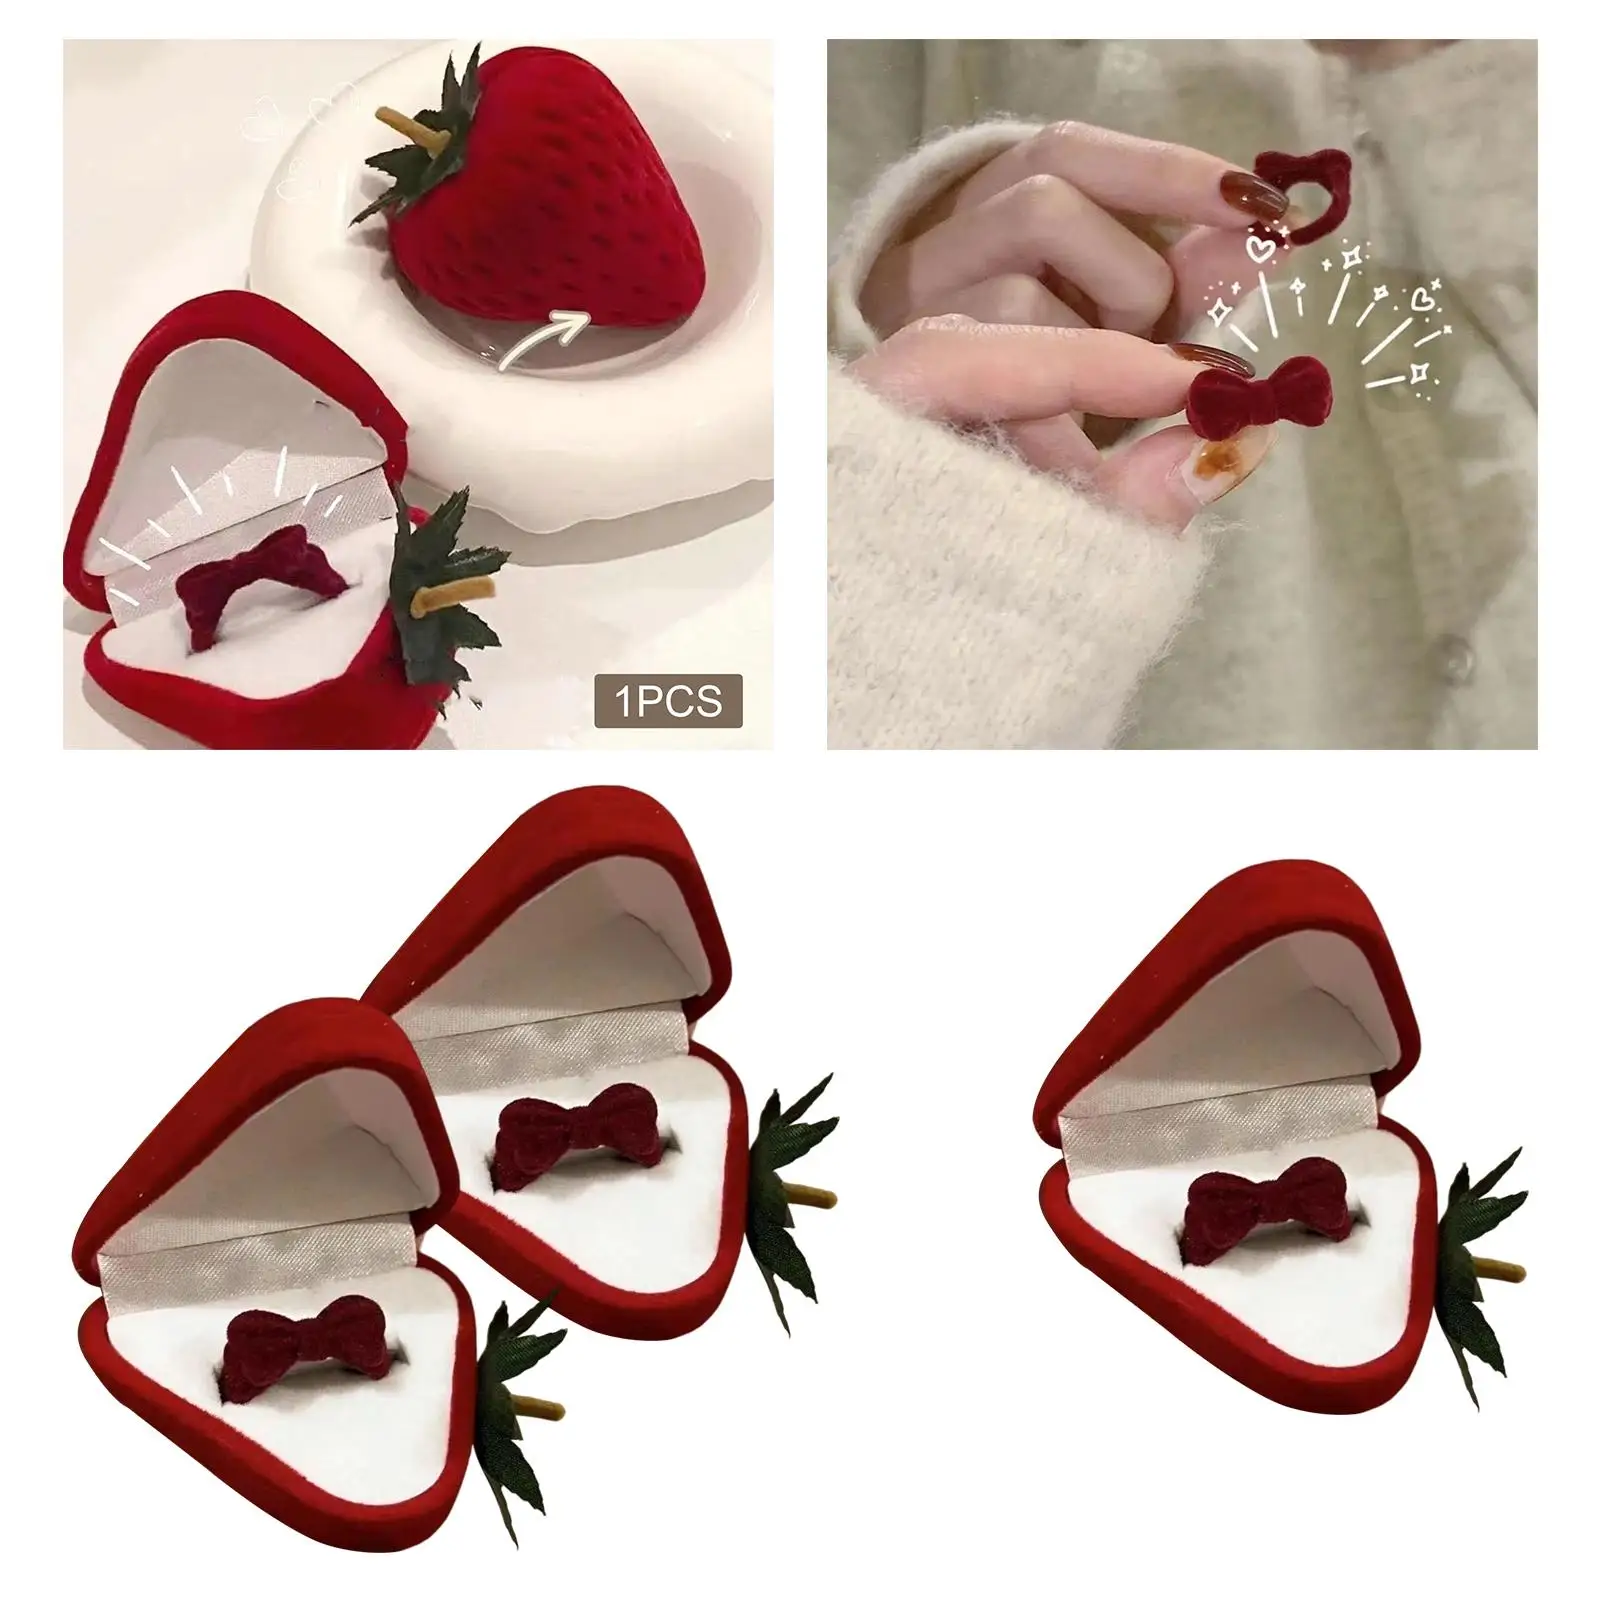 Velvet Rings Storage Case with Adjustable Ring Jewellry Display for Proposal Ceremony Wedding Engagement Valentine`S Day Gift